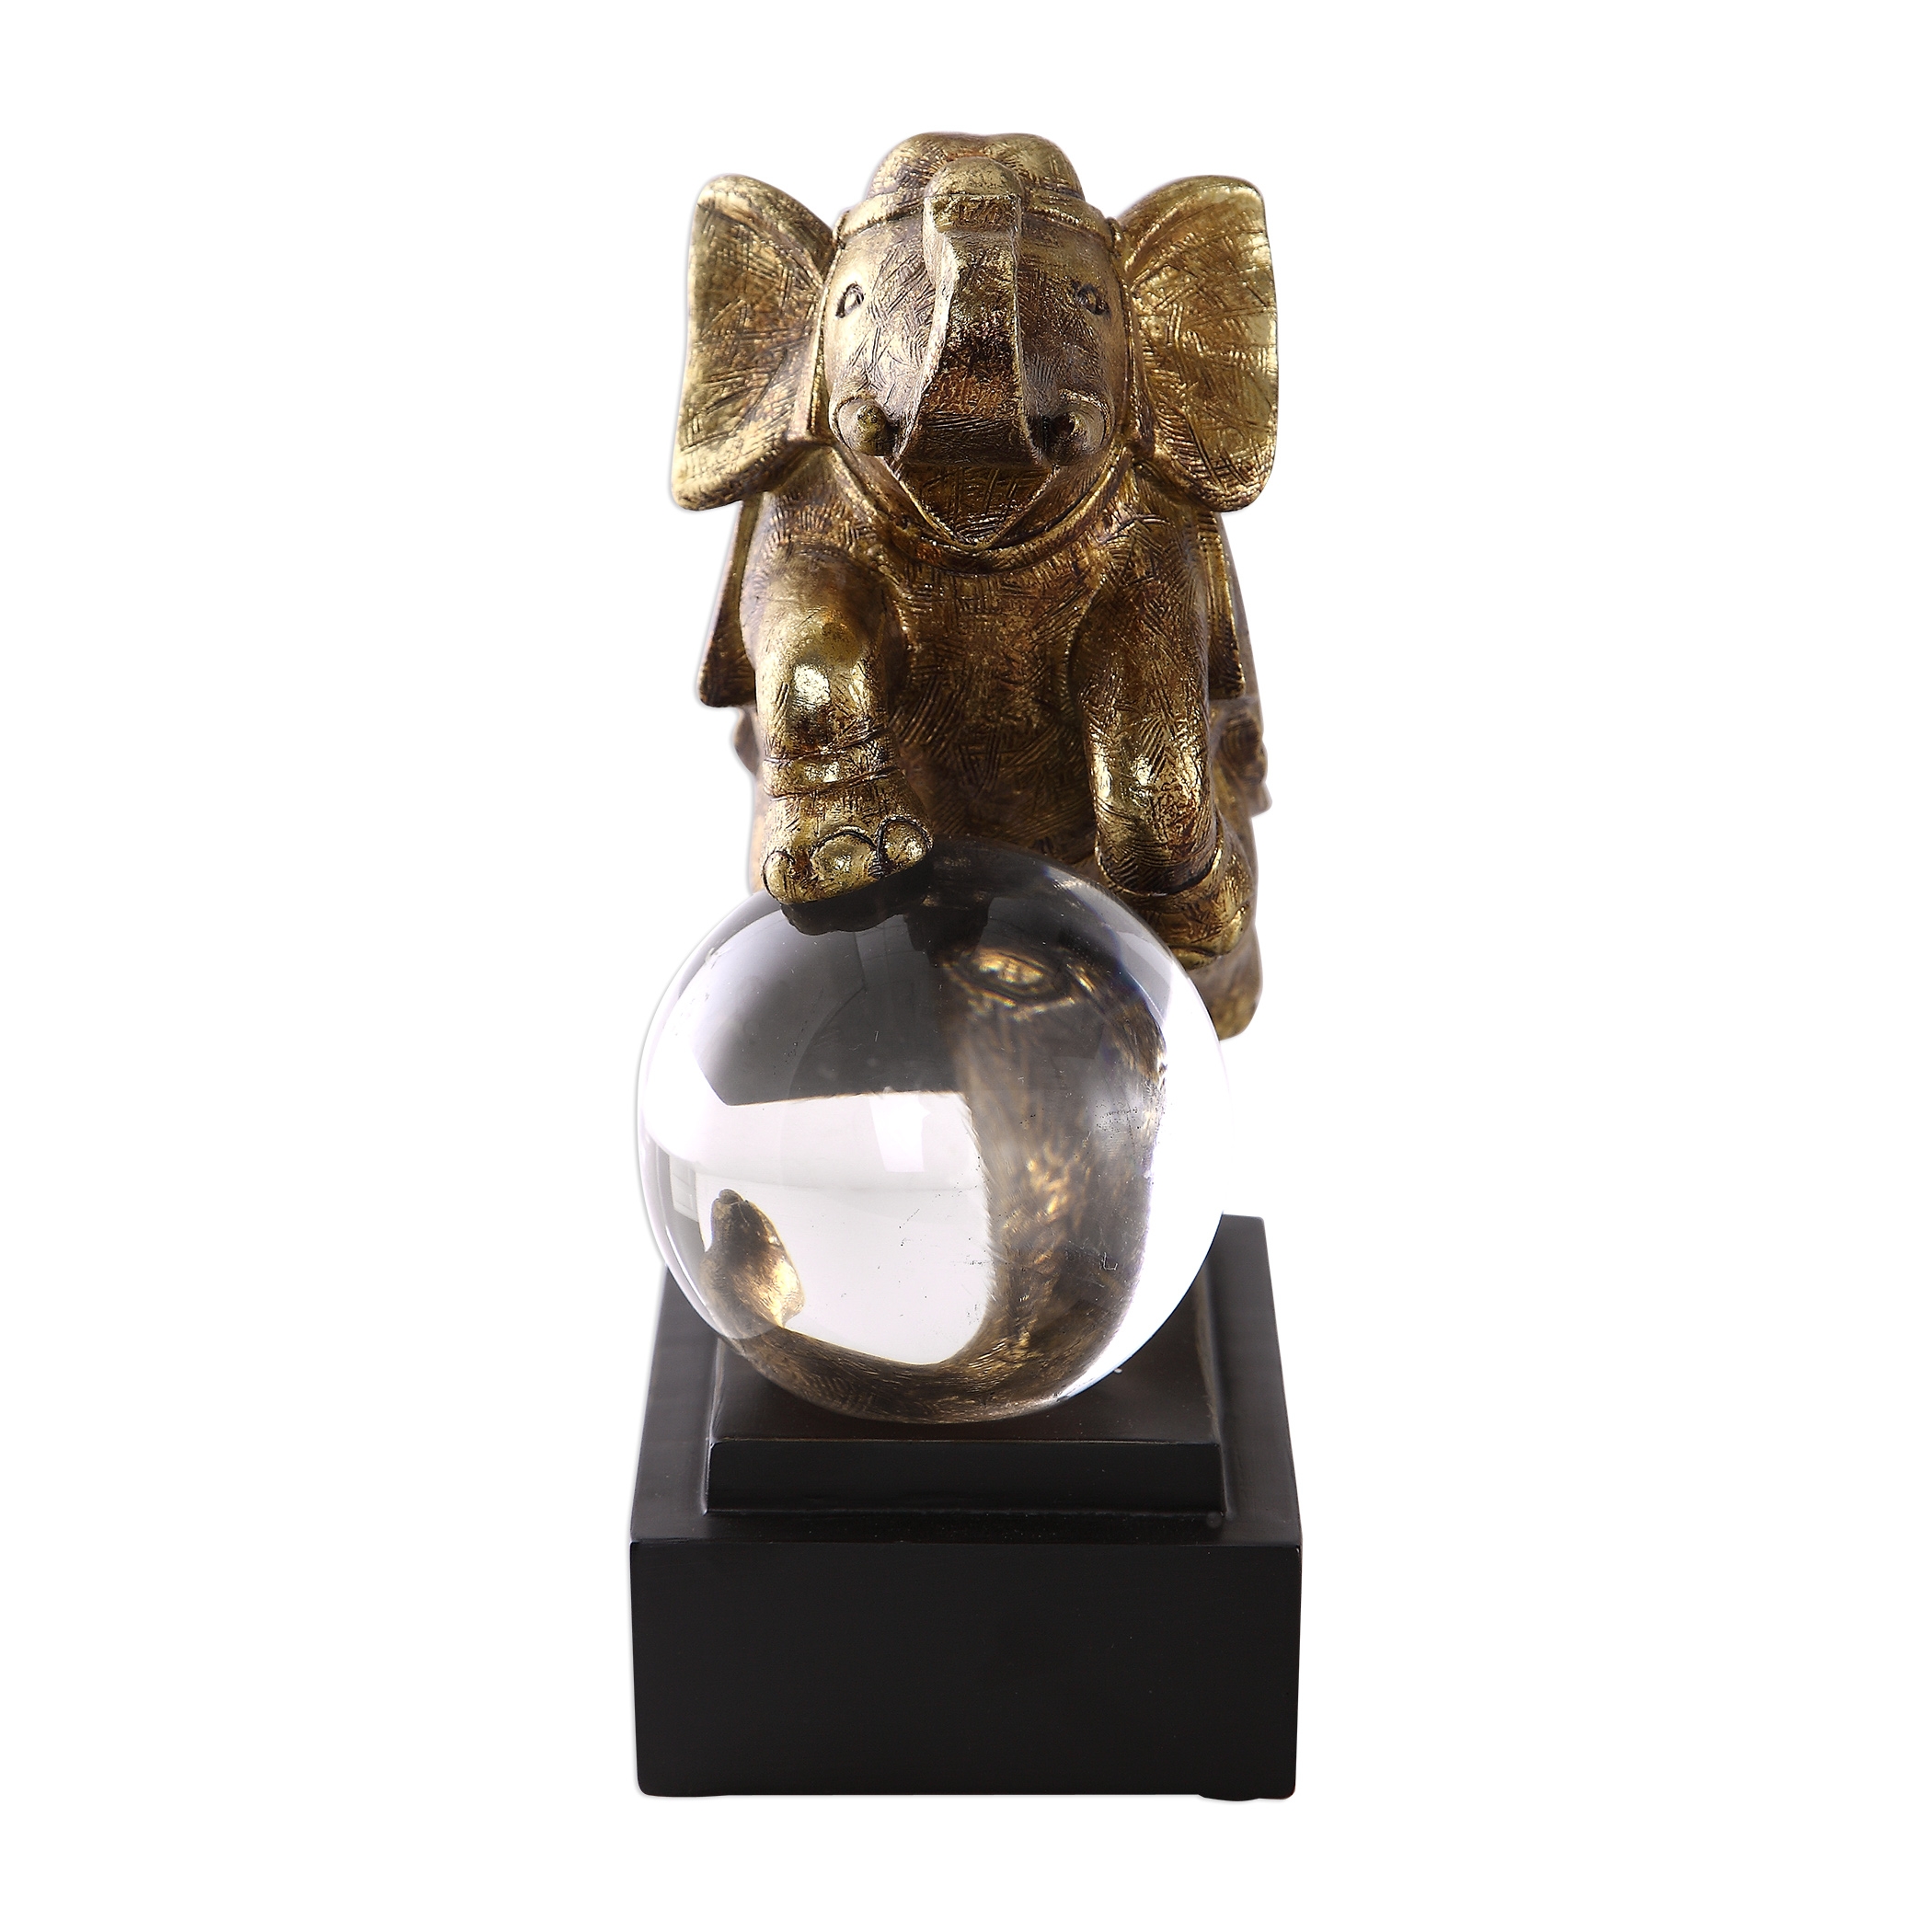 Circus Act Gold Elephant Bookends, S/2 - Image 3